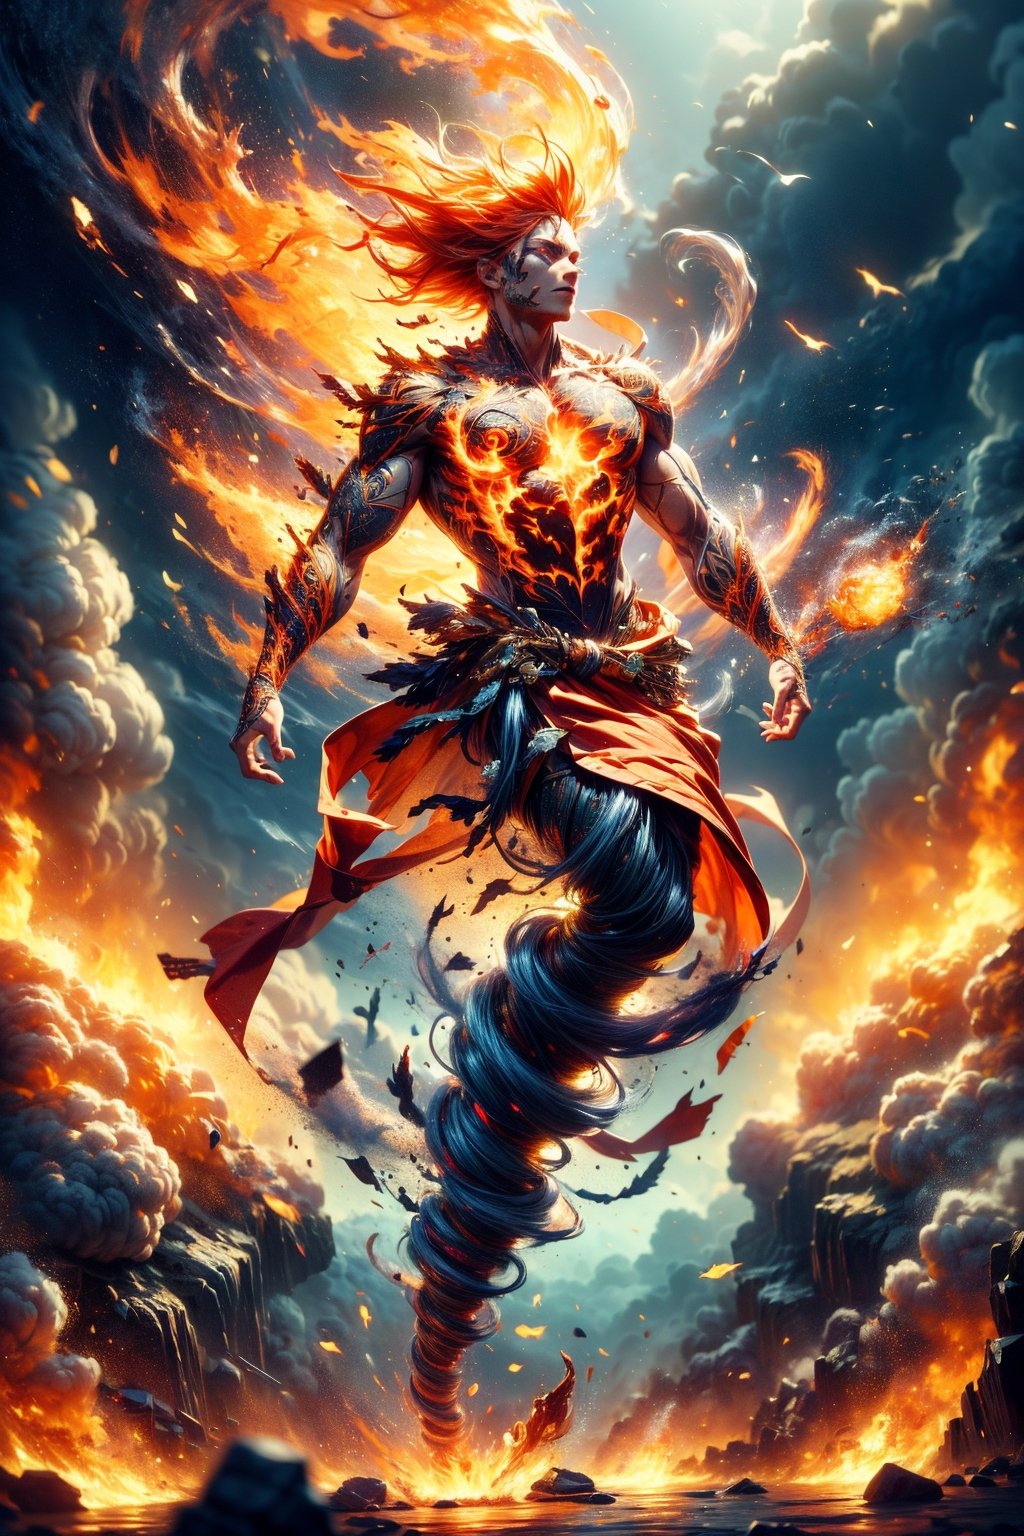 photographic, cinematic, super high detailed, super realistic image, 8k, HDR, super high quality image, master realistic image, perfect, detailed face, solo, (1boy), messy hair, orange hair, wore a red colored robe with glowing totemic embroidery, tribal tattoos, flame pentagram necklace, refined muscular body, tall, vibrant, detailed character design, reminiscent of fighting video games, full body shot, capturing the essence of ancient and immortality, dynamic, tiny maritime floating DonM3l3m3nt4l, smoke,